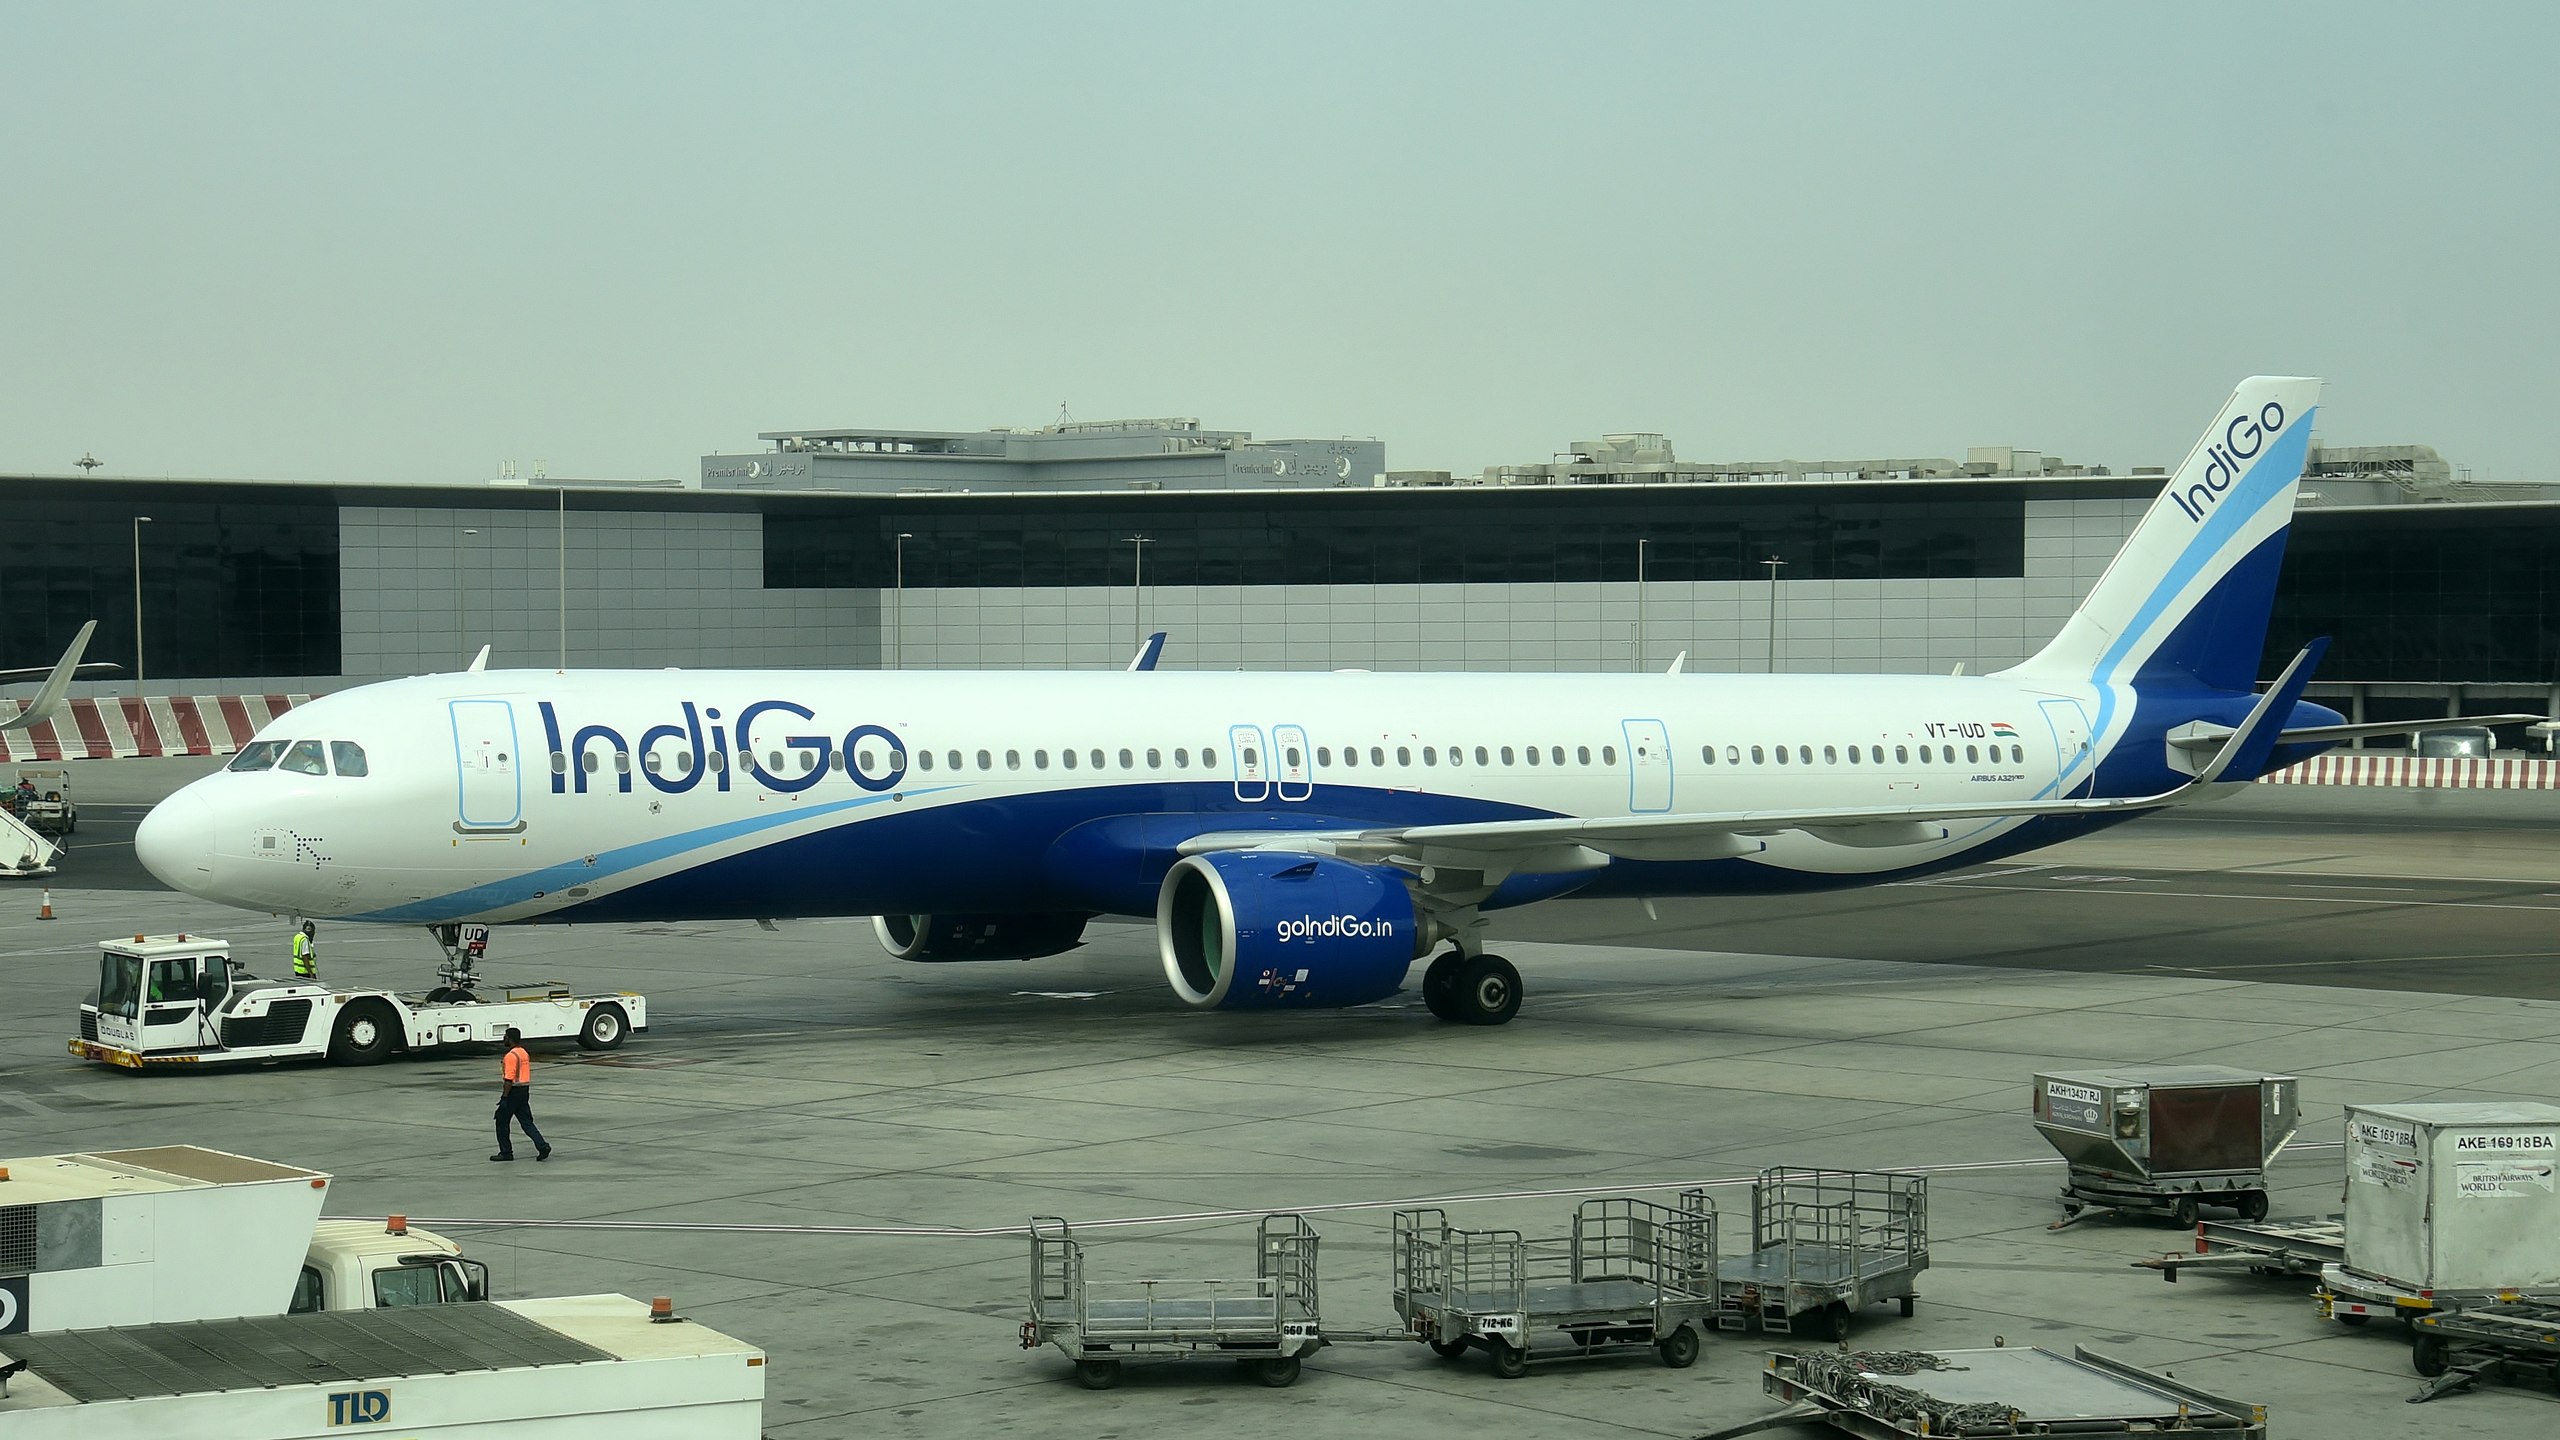 IndiGo Airbus A321neo. SpiceJet is their competitor.